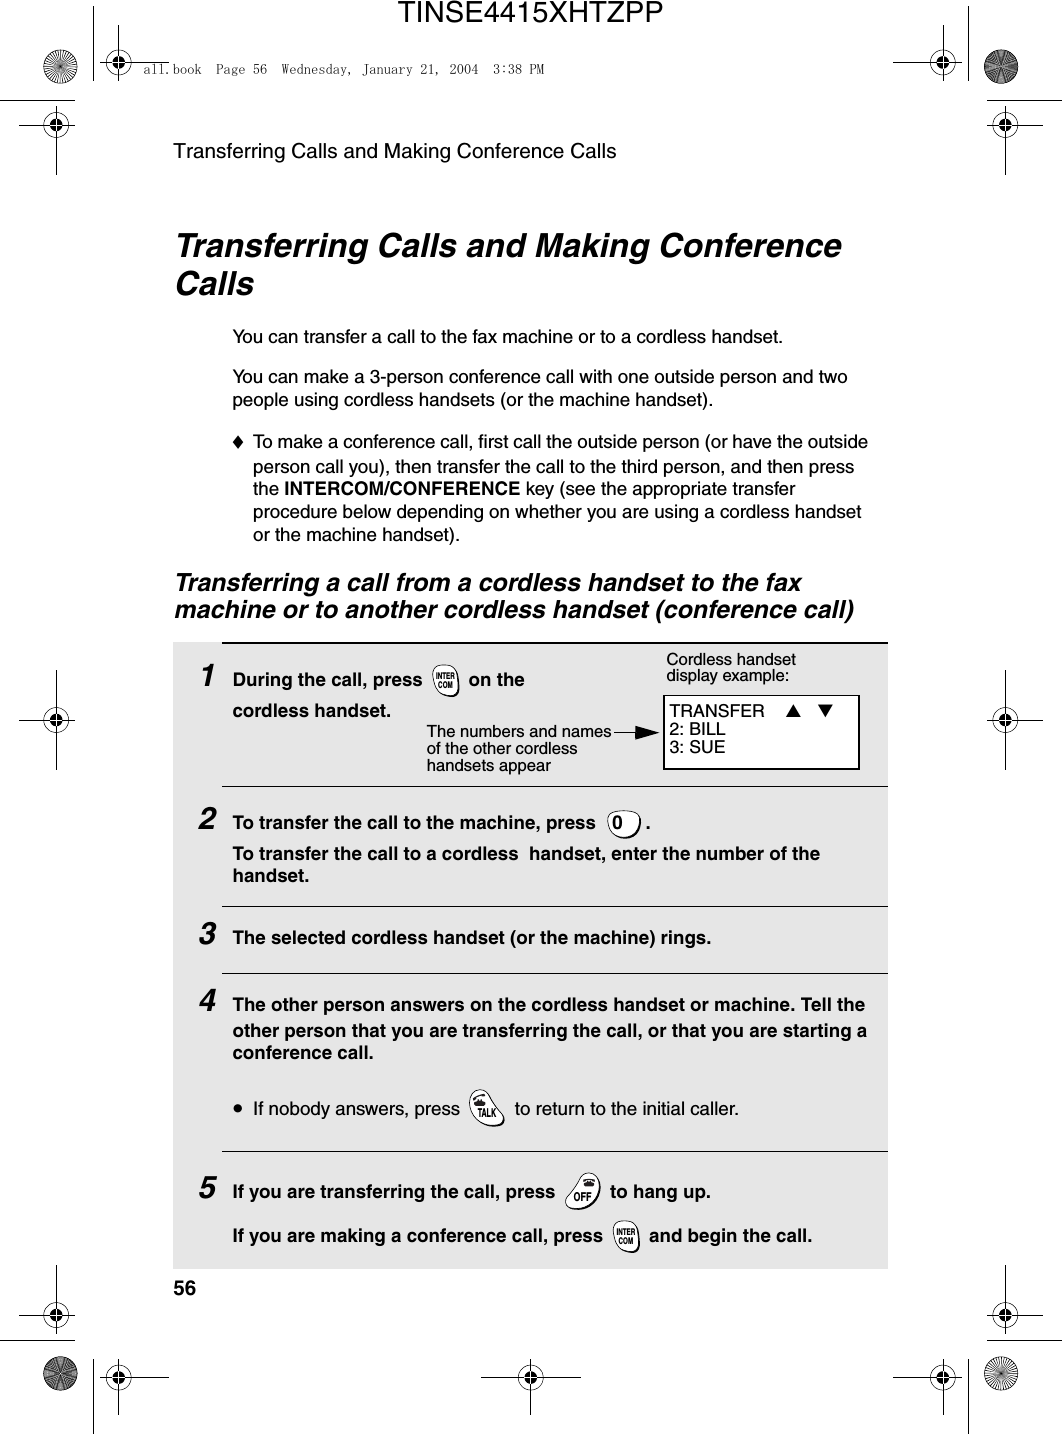 Transferring Calls and Making Conference Calls56Transferring Calls and Making Conference CallsYou can transfer a call to the fax machine or to a cordless handset. You can make a 3-person conference call with one outside person and two people using cordless handsets (or the machine handset).♦To make a conference call, first call the outside person (or have the outside person call you), then transfer the call to the third person, and then press the INTERCOM/CONFERENCE key (see the appropriate transfer procedure below depending on whether you are using a cordless handset or the machine handset). Transferring a call from a cordless handset to the fax machine or to another cordless handset (conference call)1During the call, press   on the cordless handset.2To transfer the call to the machine, press  .To transfer the call to a cordless  handset, enter the number of the handset.3The selected cordless handset (or the machine) rings.4The other person answers on the cordless handset or machine. Tell the other person that you are transferring the call, or that you are starting a conference call.•If nobody answers, press   to return to the initial caller.5If you are transferring the call, press   to hang up. If you are making a conference call, press   and begin the call. INTERCOM0TALKOFFOFFINTERCOMTRANSFER  ▲ ▼  2: BILL3: SUECordless handset display example:The numbers and names of the other cordless handsets appear all.book  Page 56  Wednesday, January 21, 2004  3:38 PMTINSE4415XHTZPP